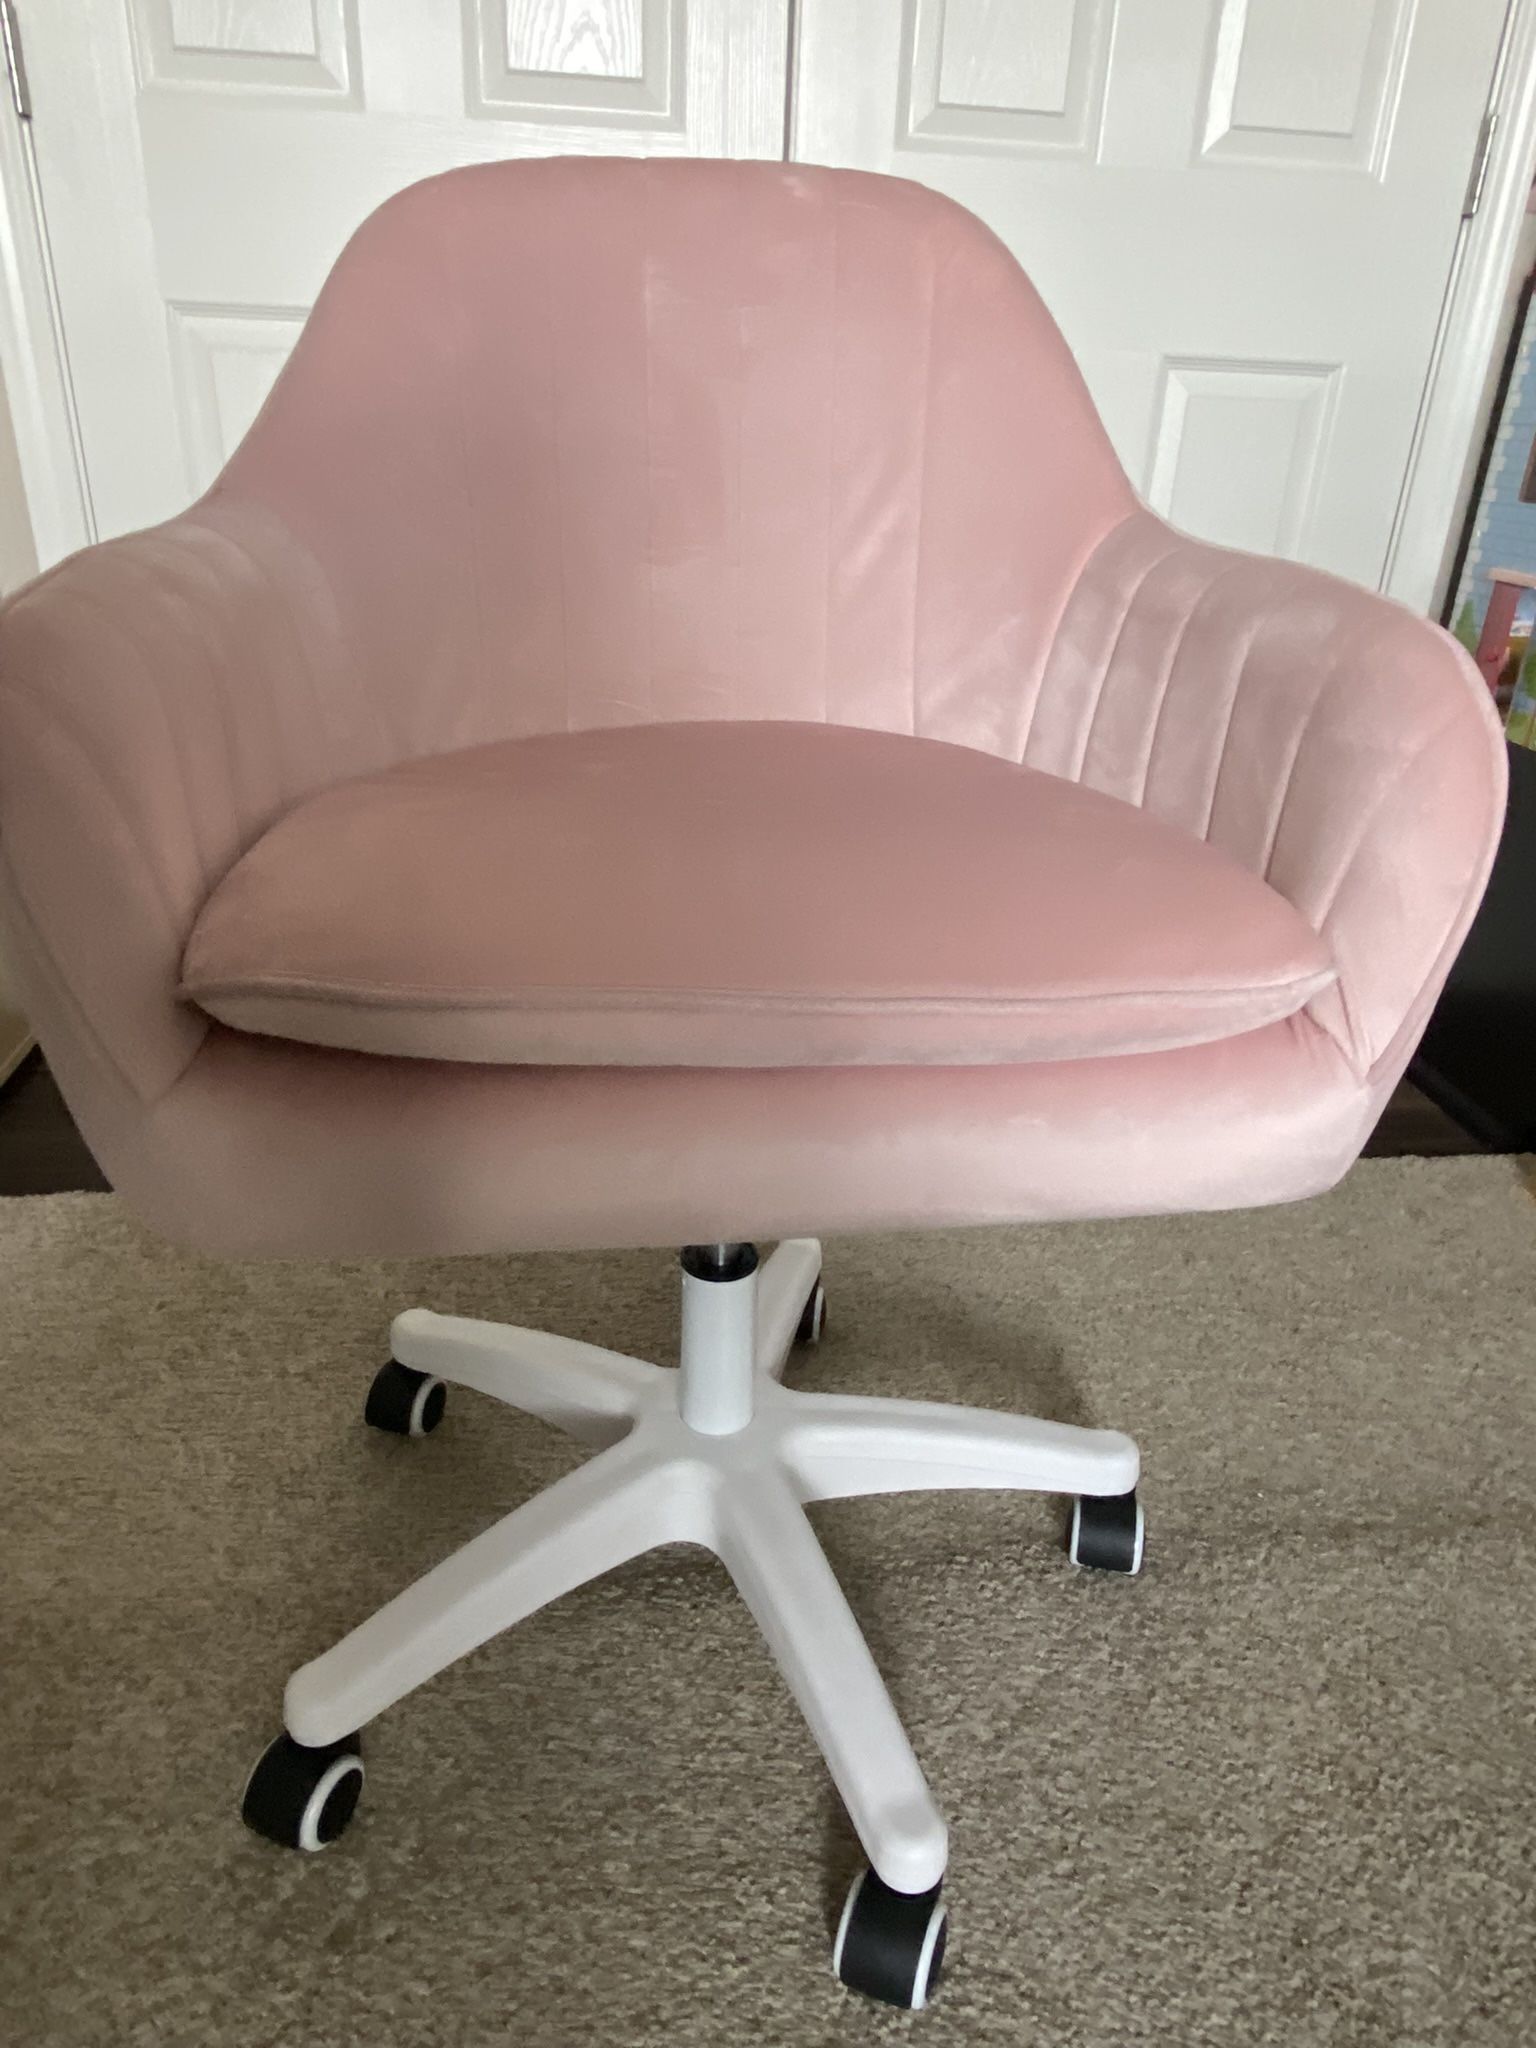 NEW!  PINK OFFICE CHAIR 